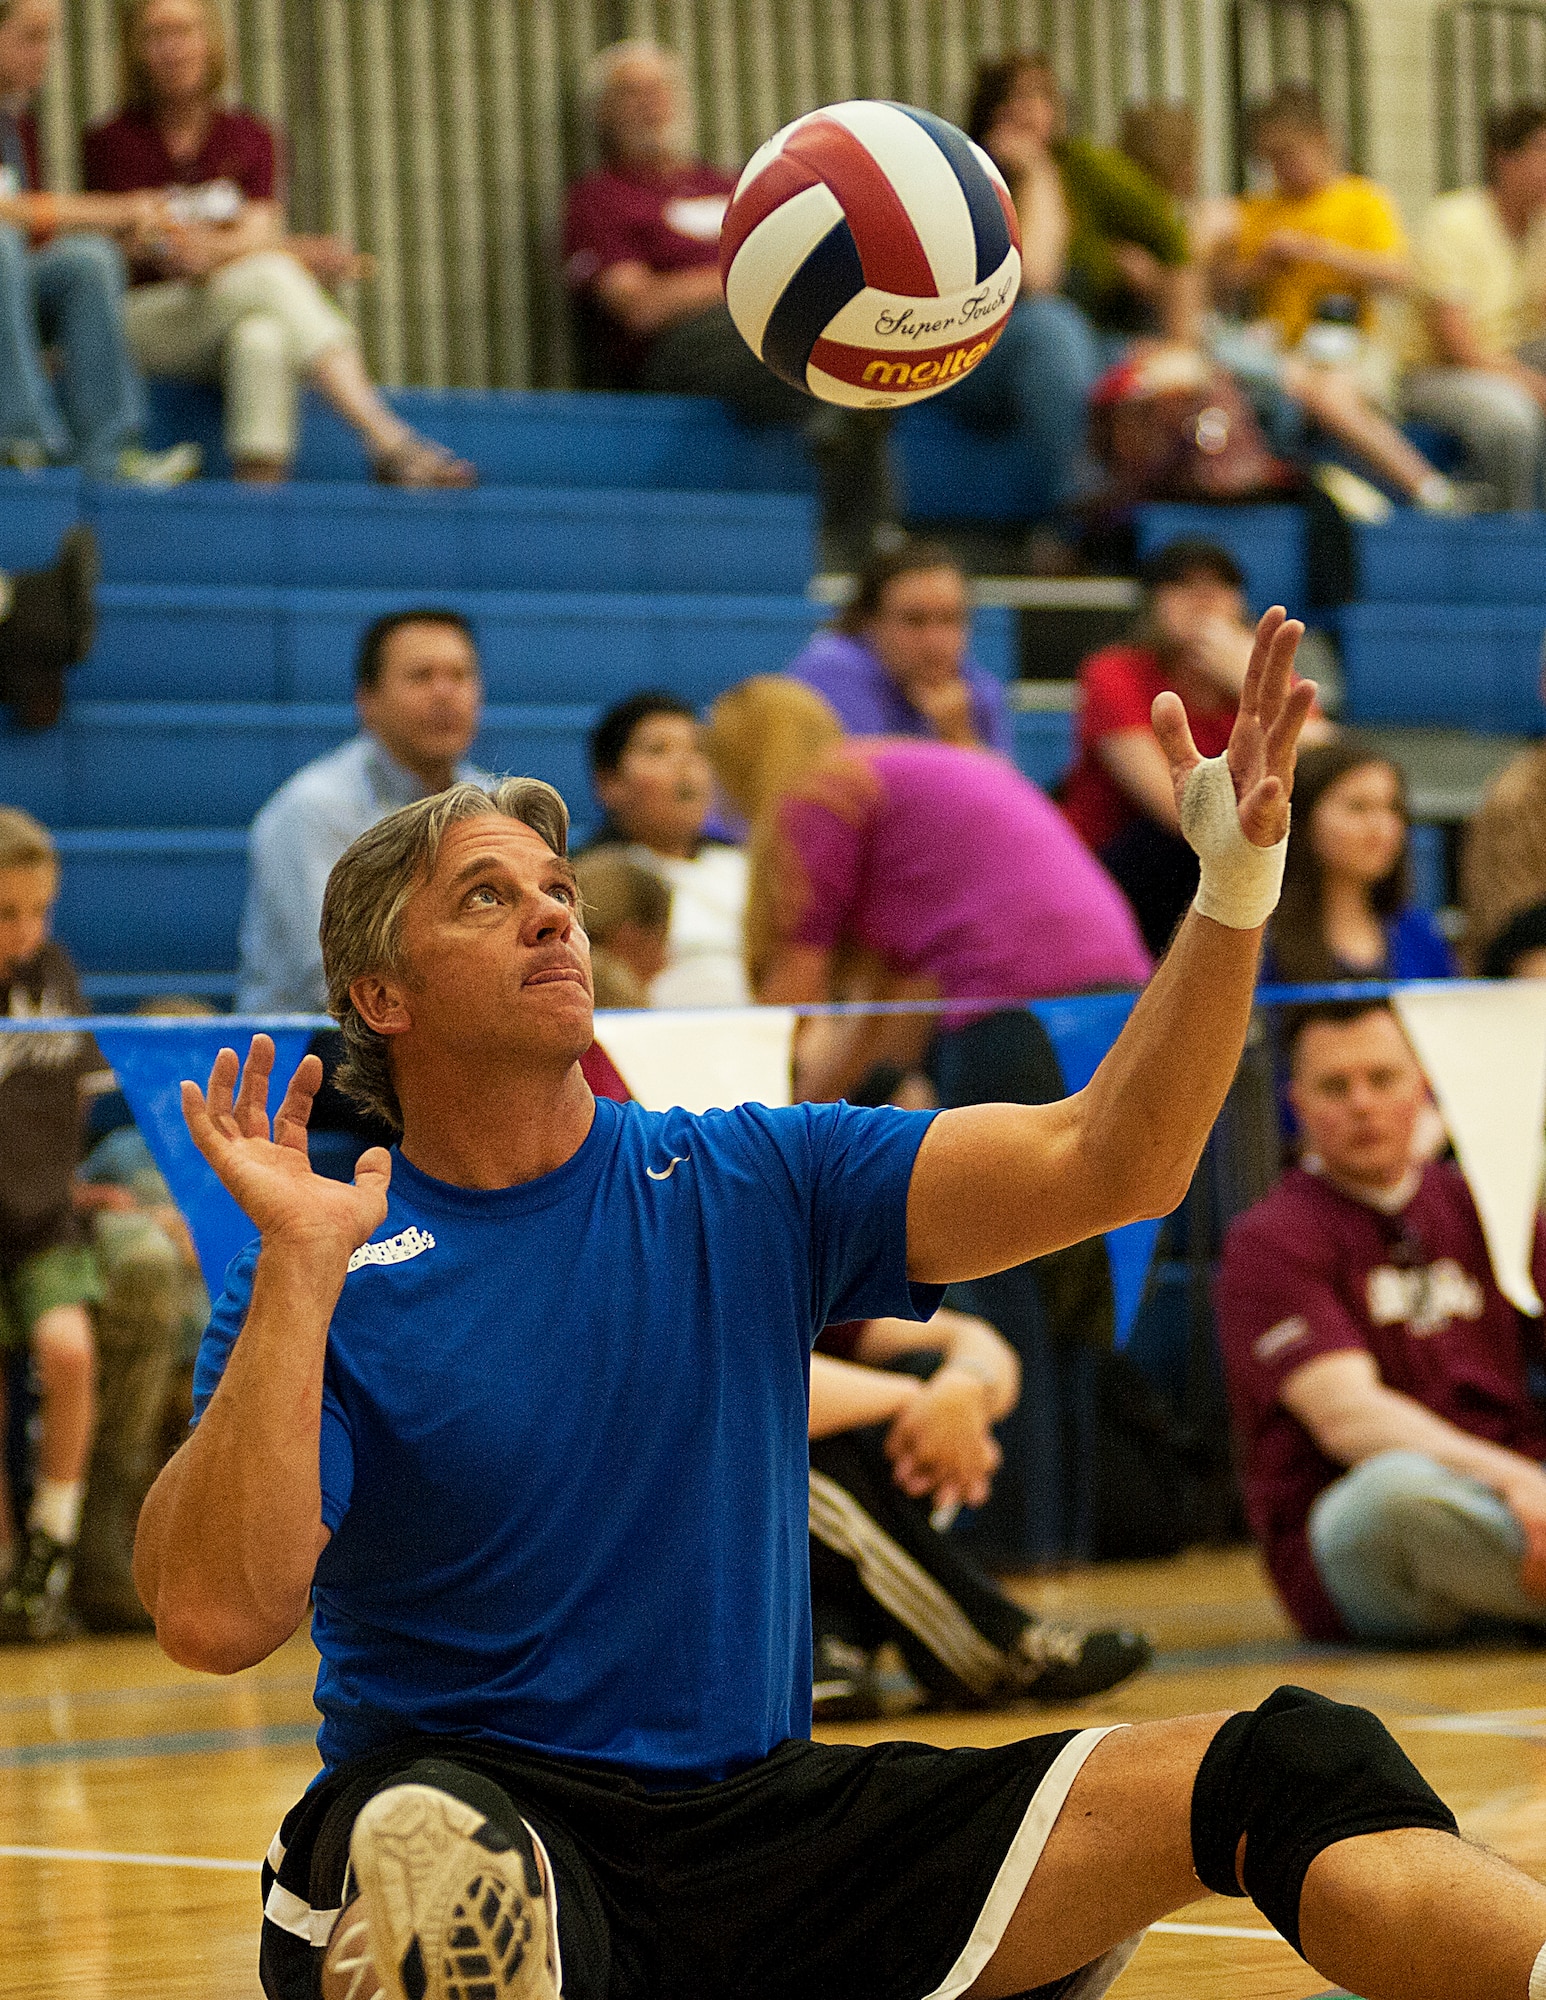 Ken Gestring, with the Air Force team, serves the ball during his team's sitting volleyball bronze medal game against the Special Operations Command team during the 2012 Warrior Games at the U.S. Air Force Academy in Colorado Springs, Colo., May 3, 2012. Air Force won 25-12 and 25-20. (U.S. Air Force photo/Val Gempis)